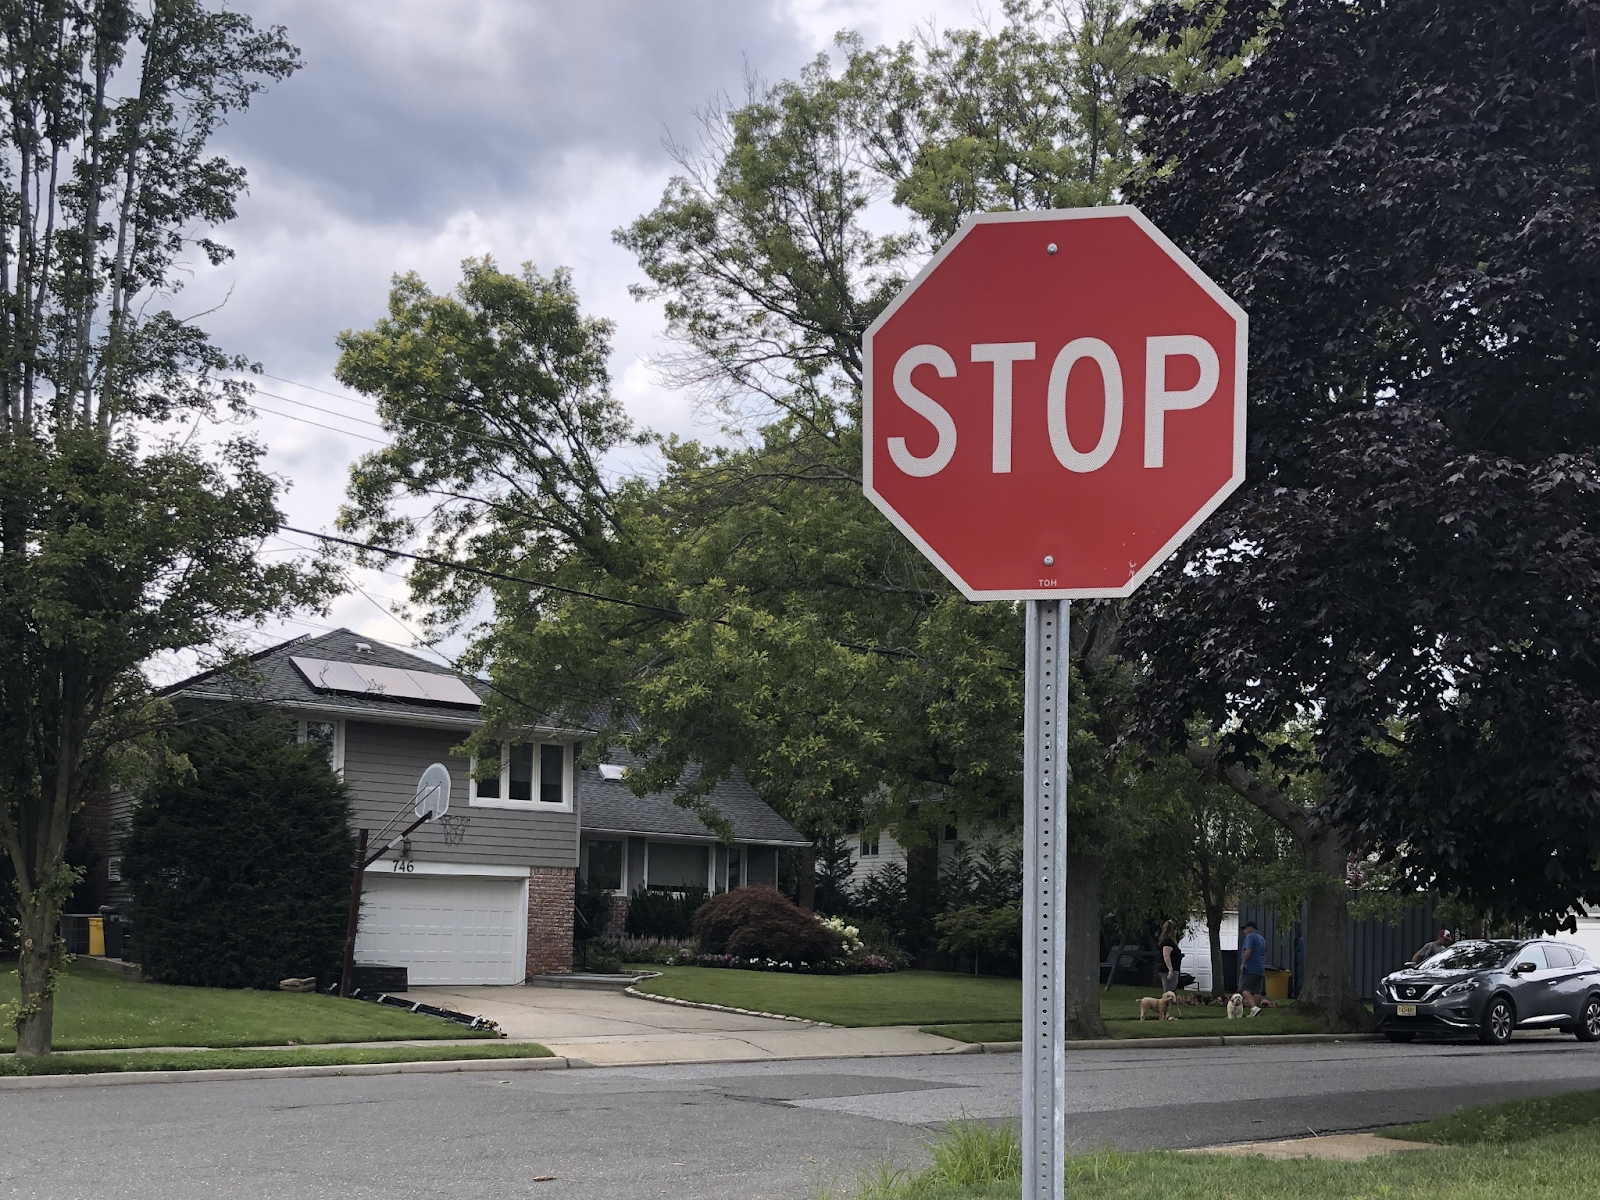 An automobile stopped in front of a sign might obscure it from oncoming traffic. Further, if vehicle owners disregard a sign and refuse to come to a complete stop, lives could be in danger.
